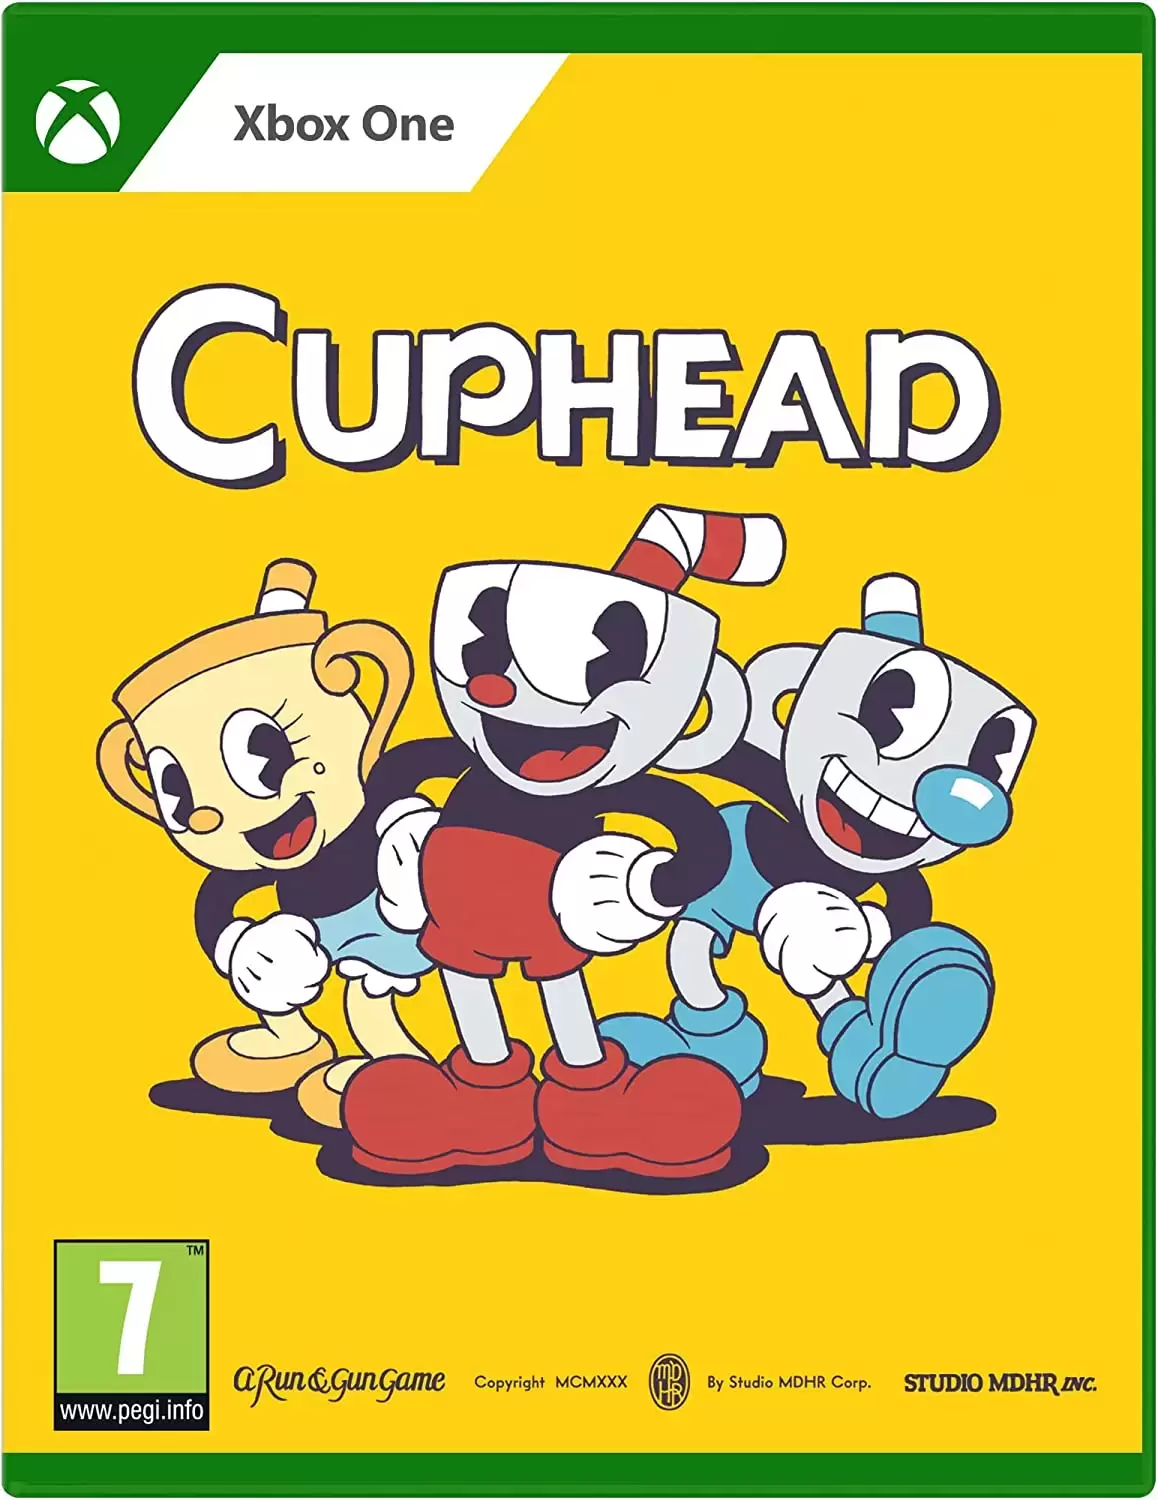 XBOX One Games - Cuphead